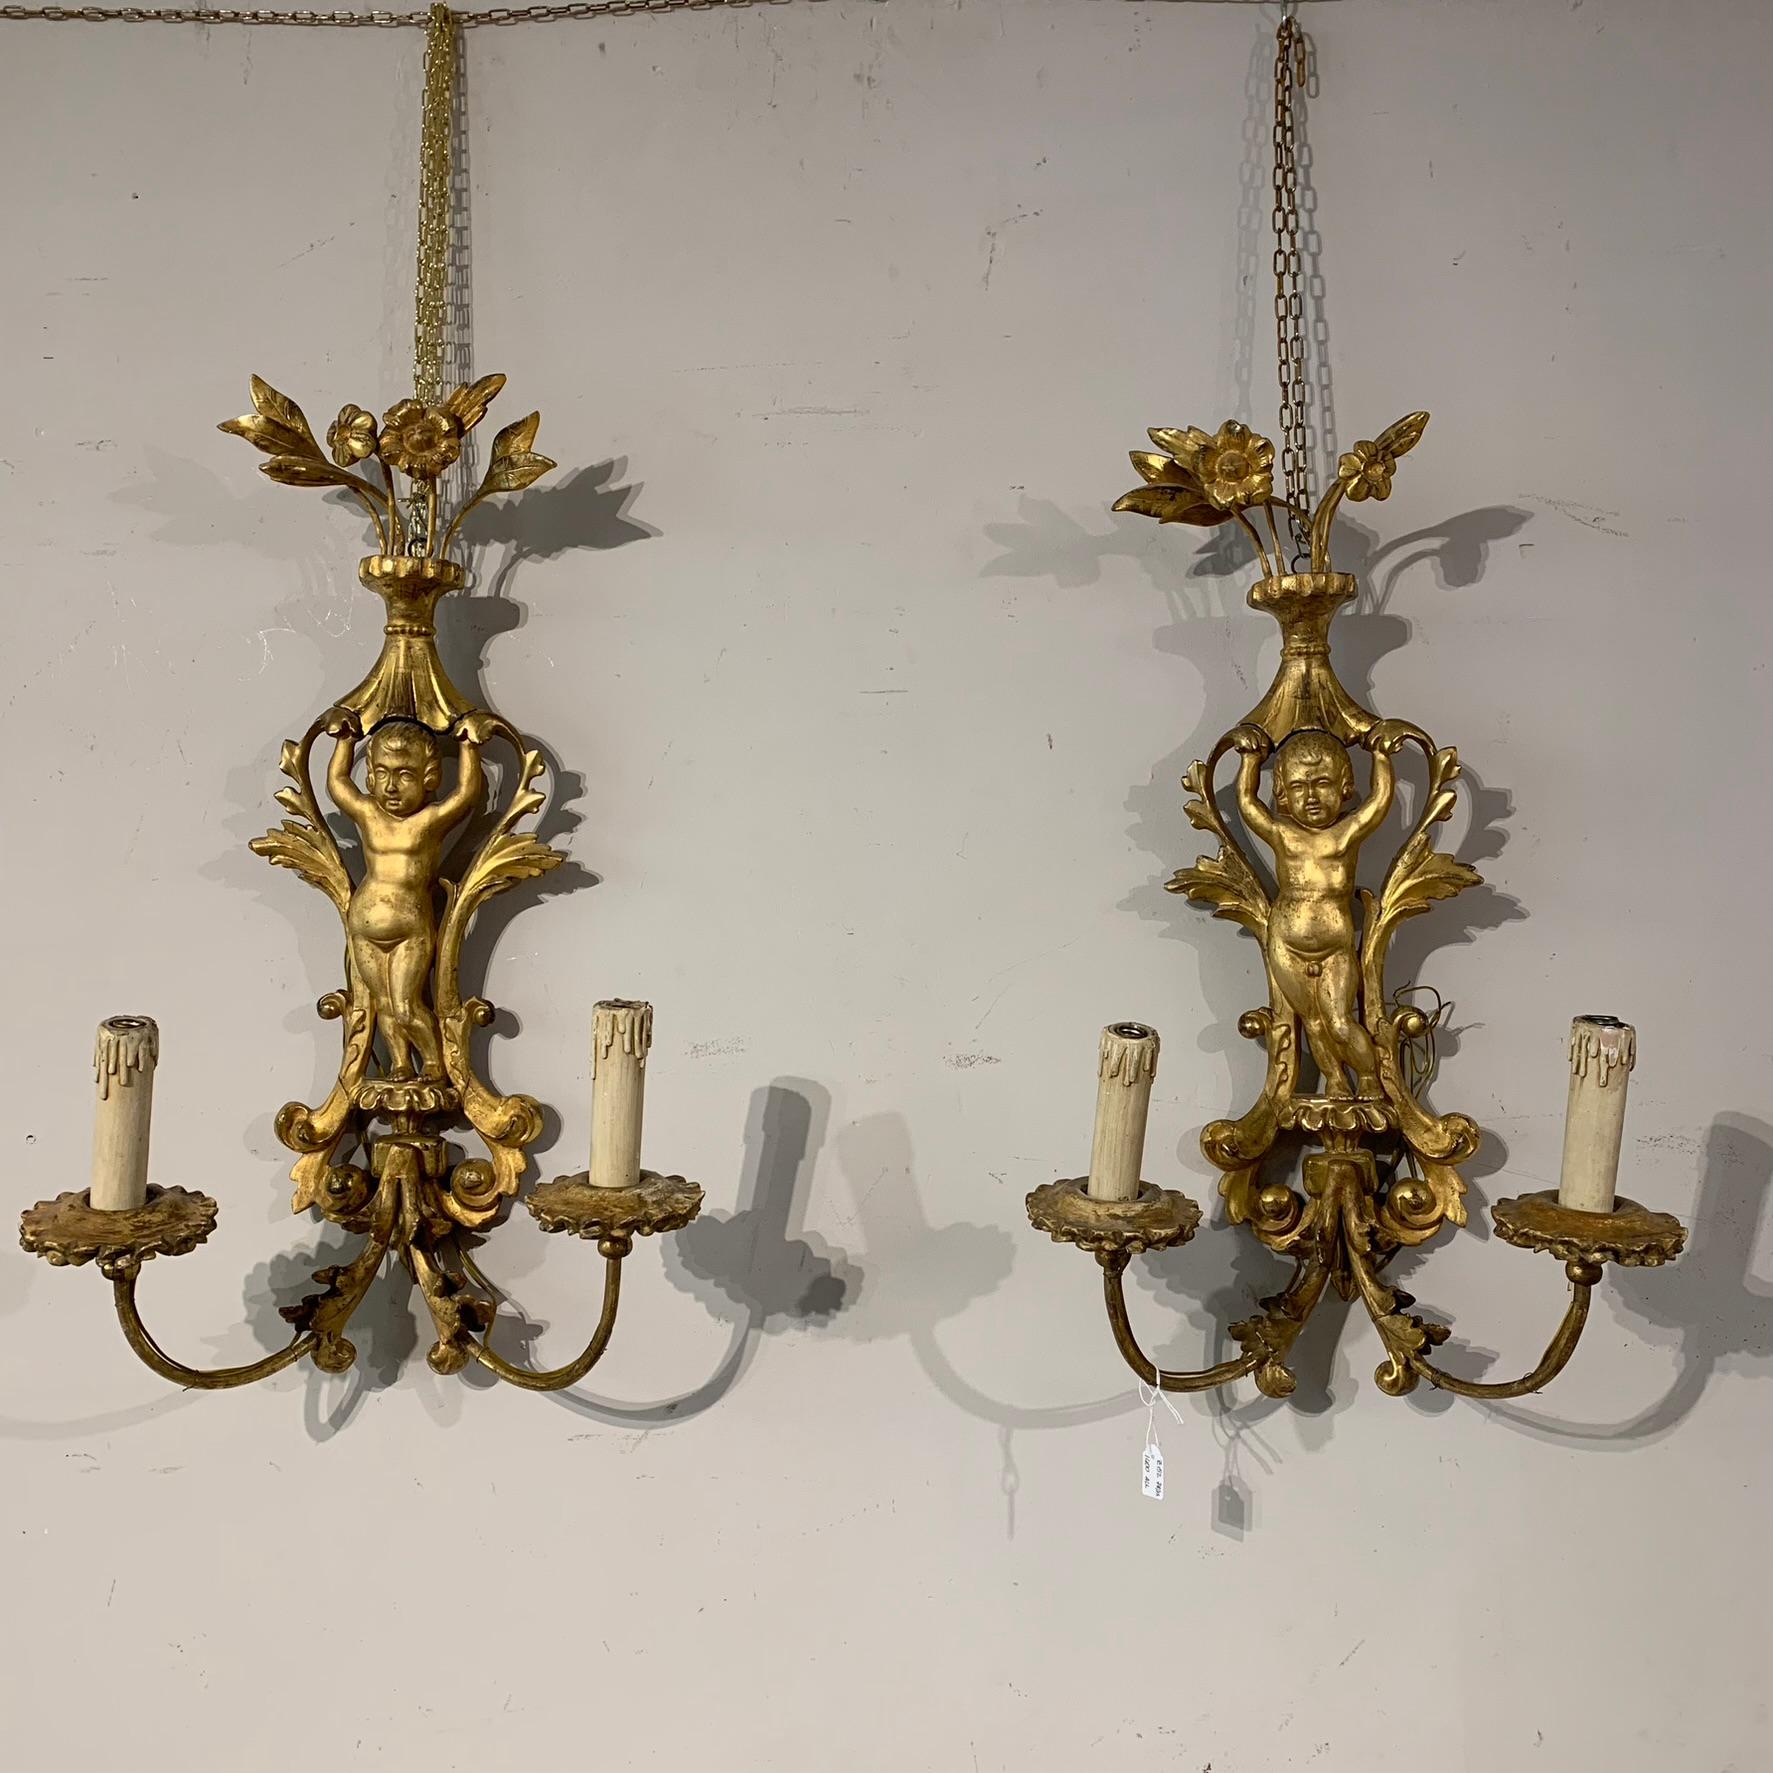 Beautiful pair of carved and gilded wooden appliques with pure gold leaf, made like two cherubs holding up a vase of flowers.
Two candle holder arms in iron, also gilded.